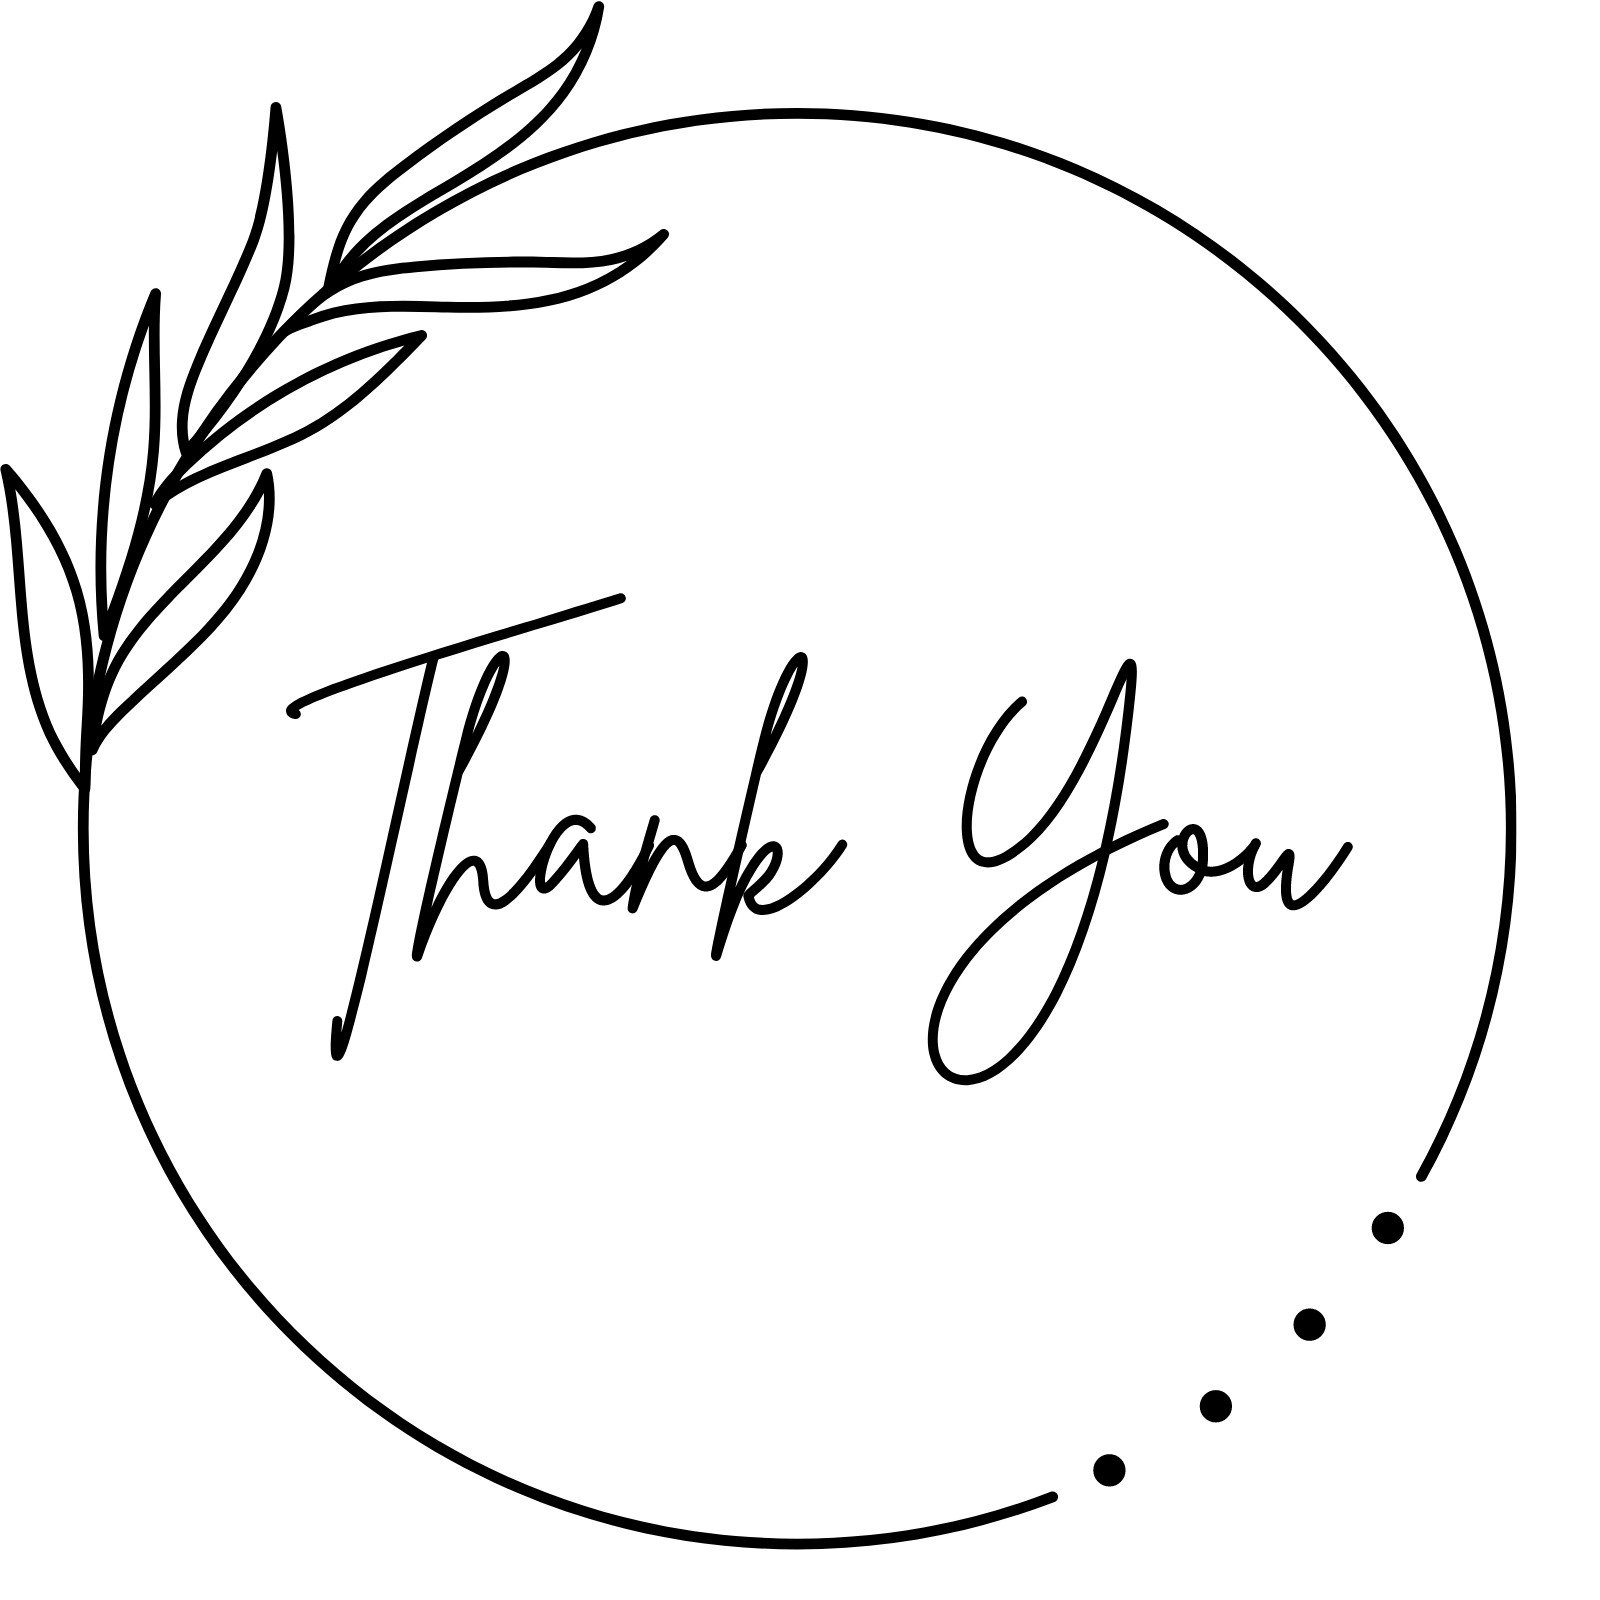 Free and customizable thank you templates